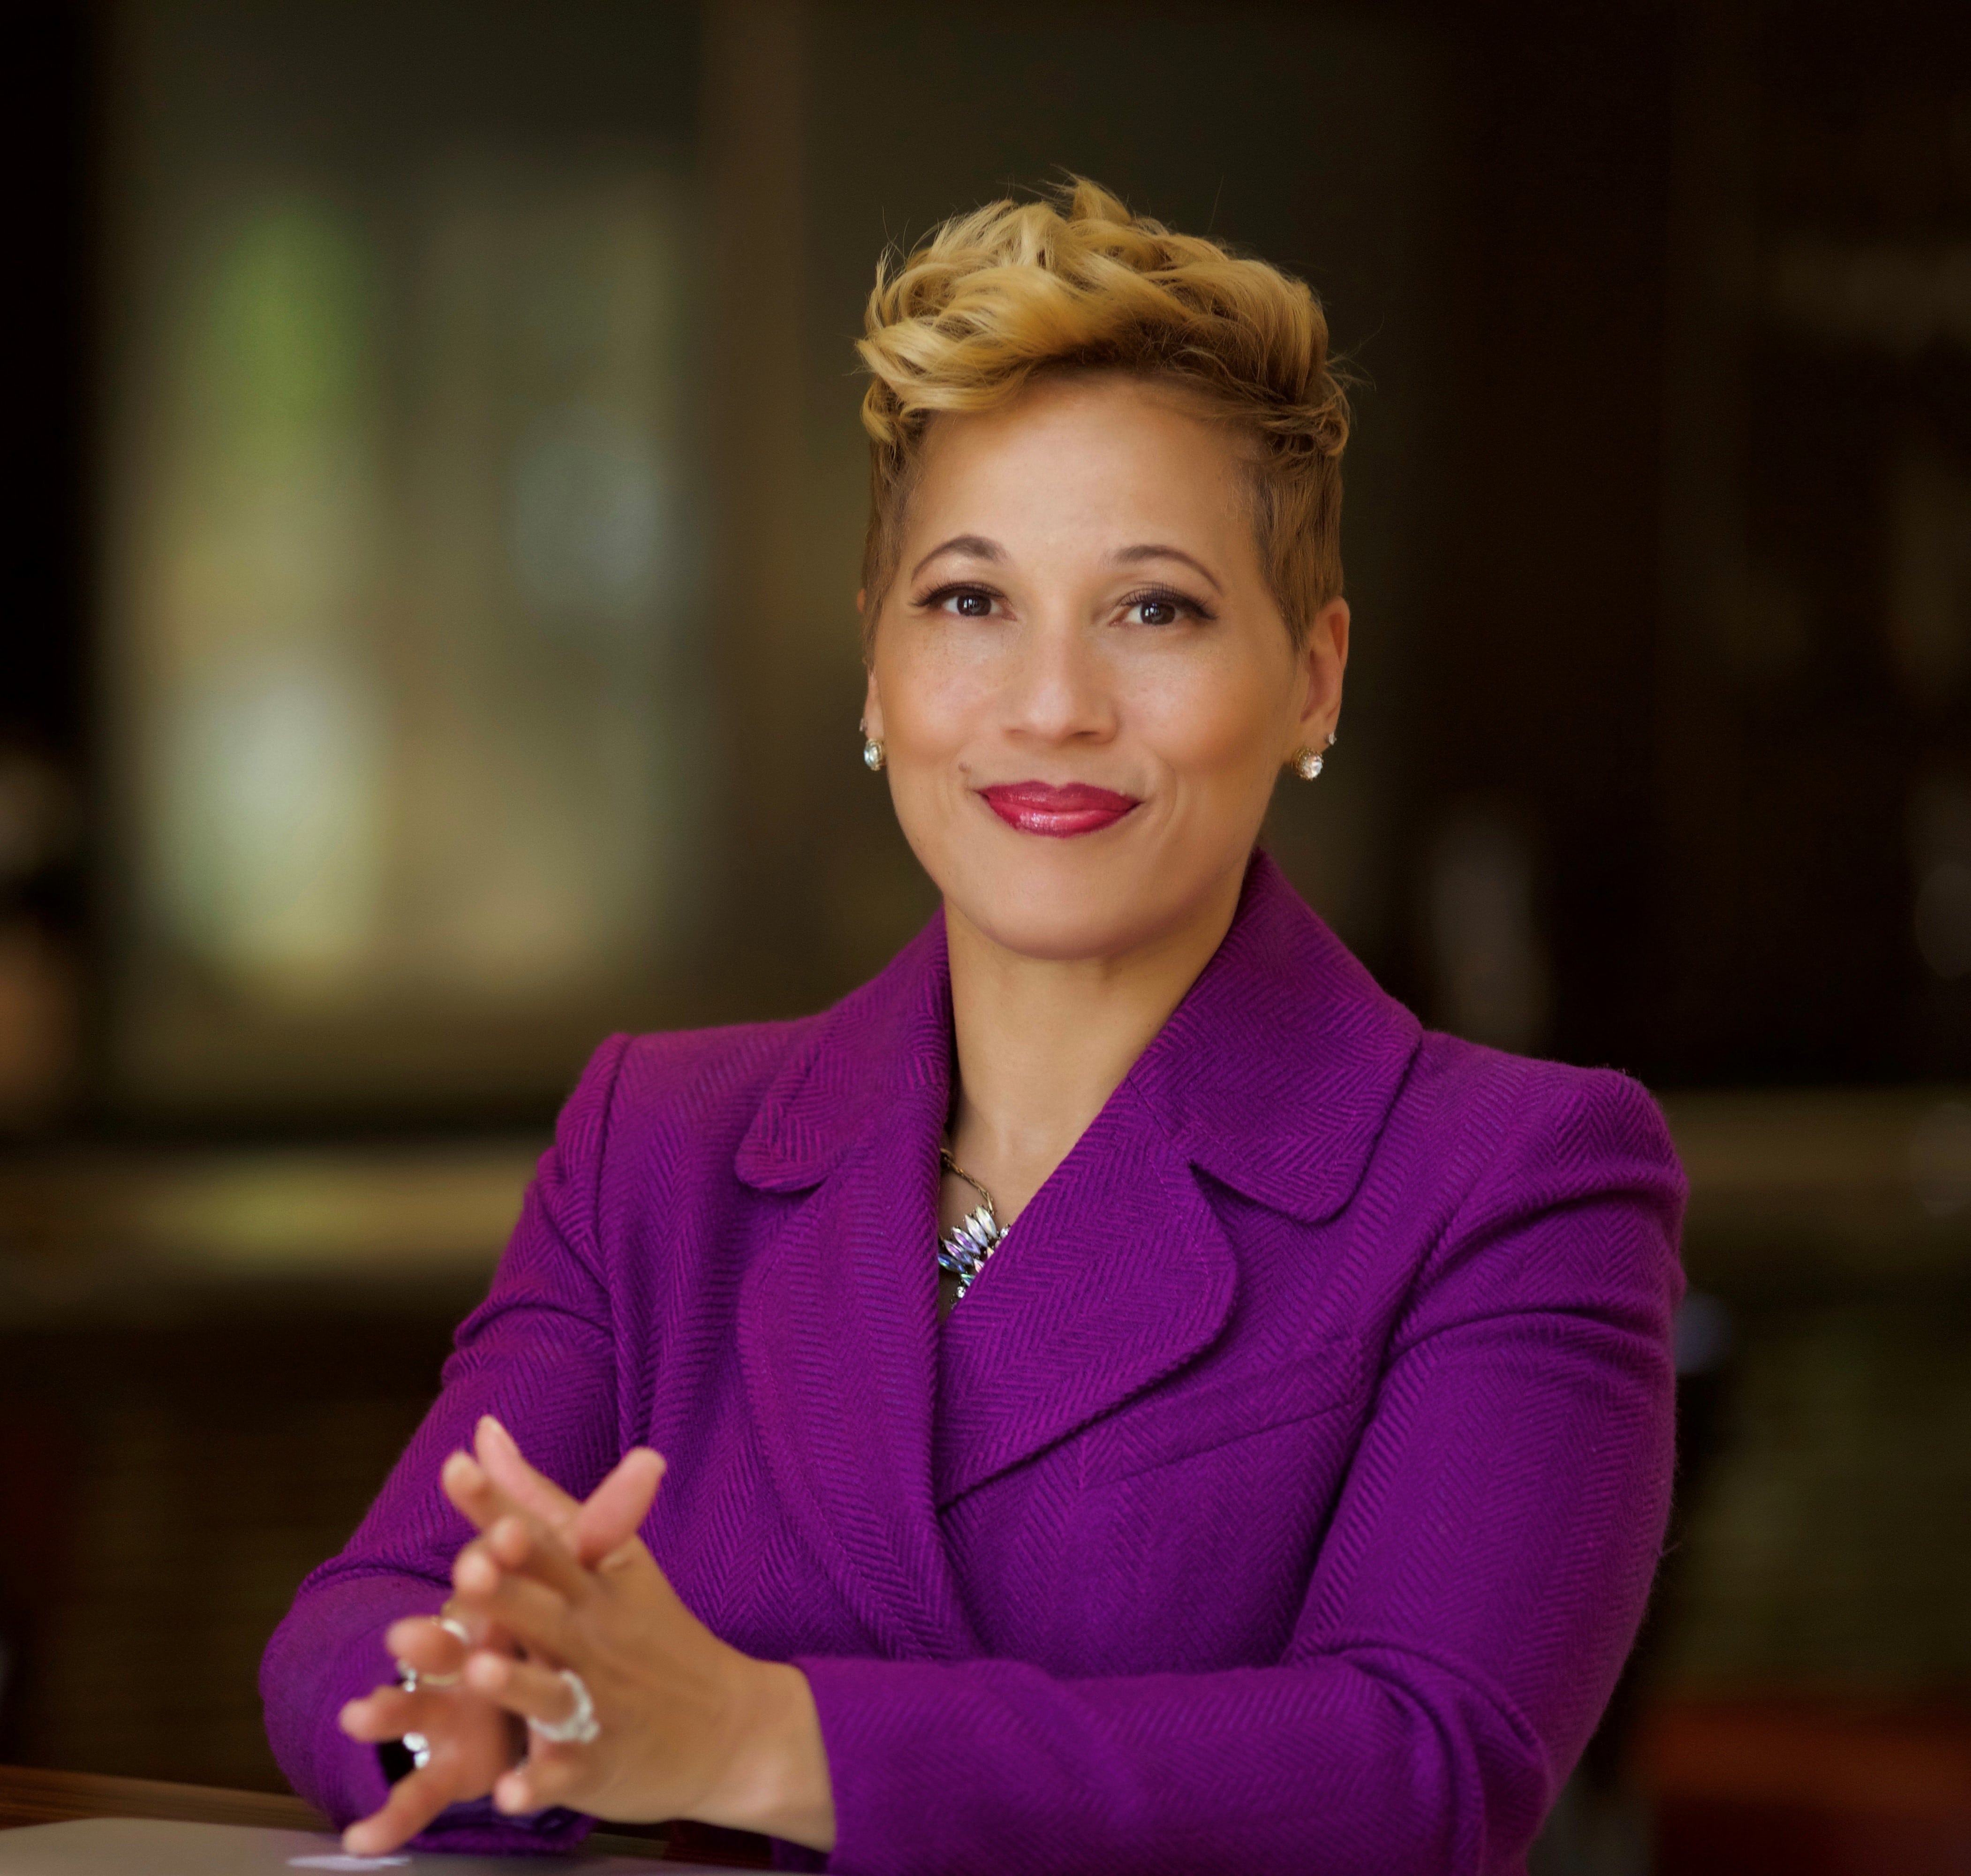 Bonnie Simpson Mason, MD, FAAOS
Vice President, Diversity, Equity, and Inclusion